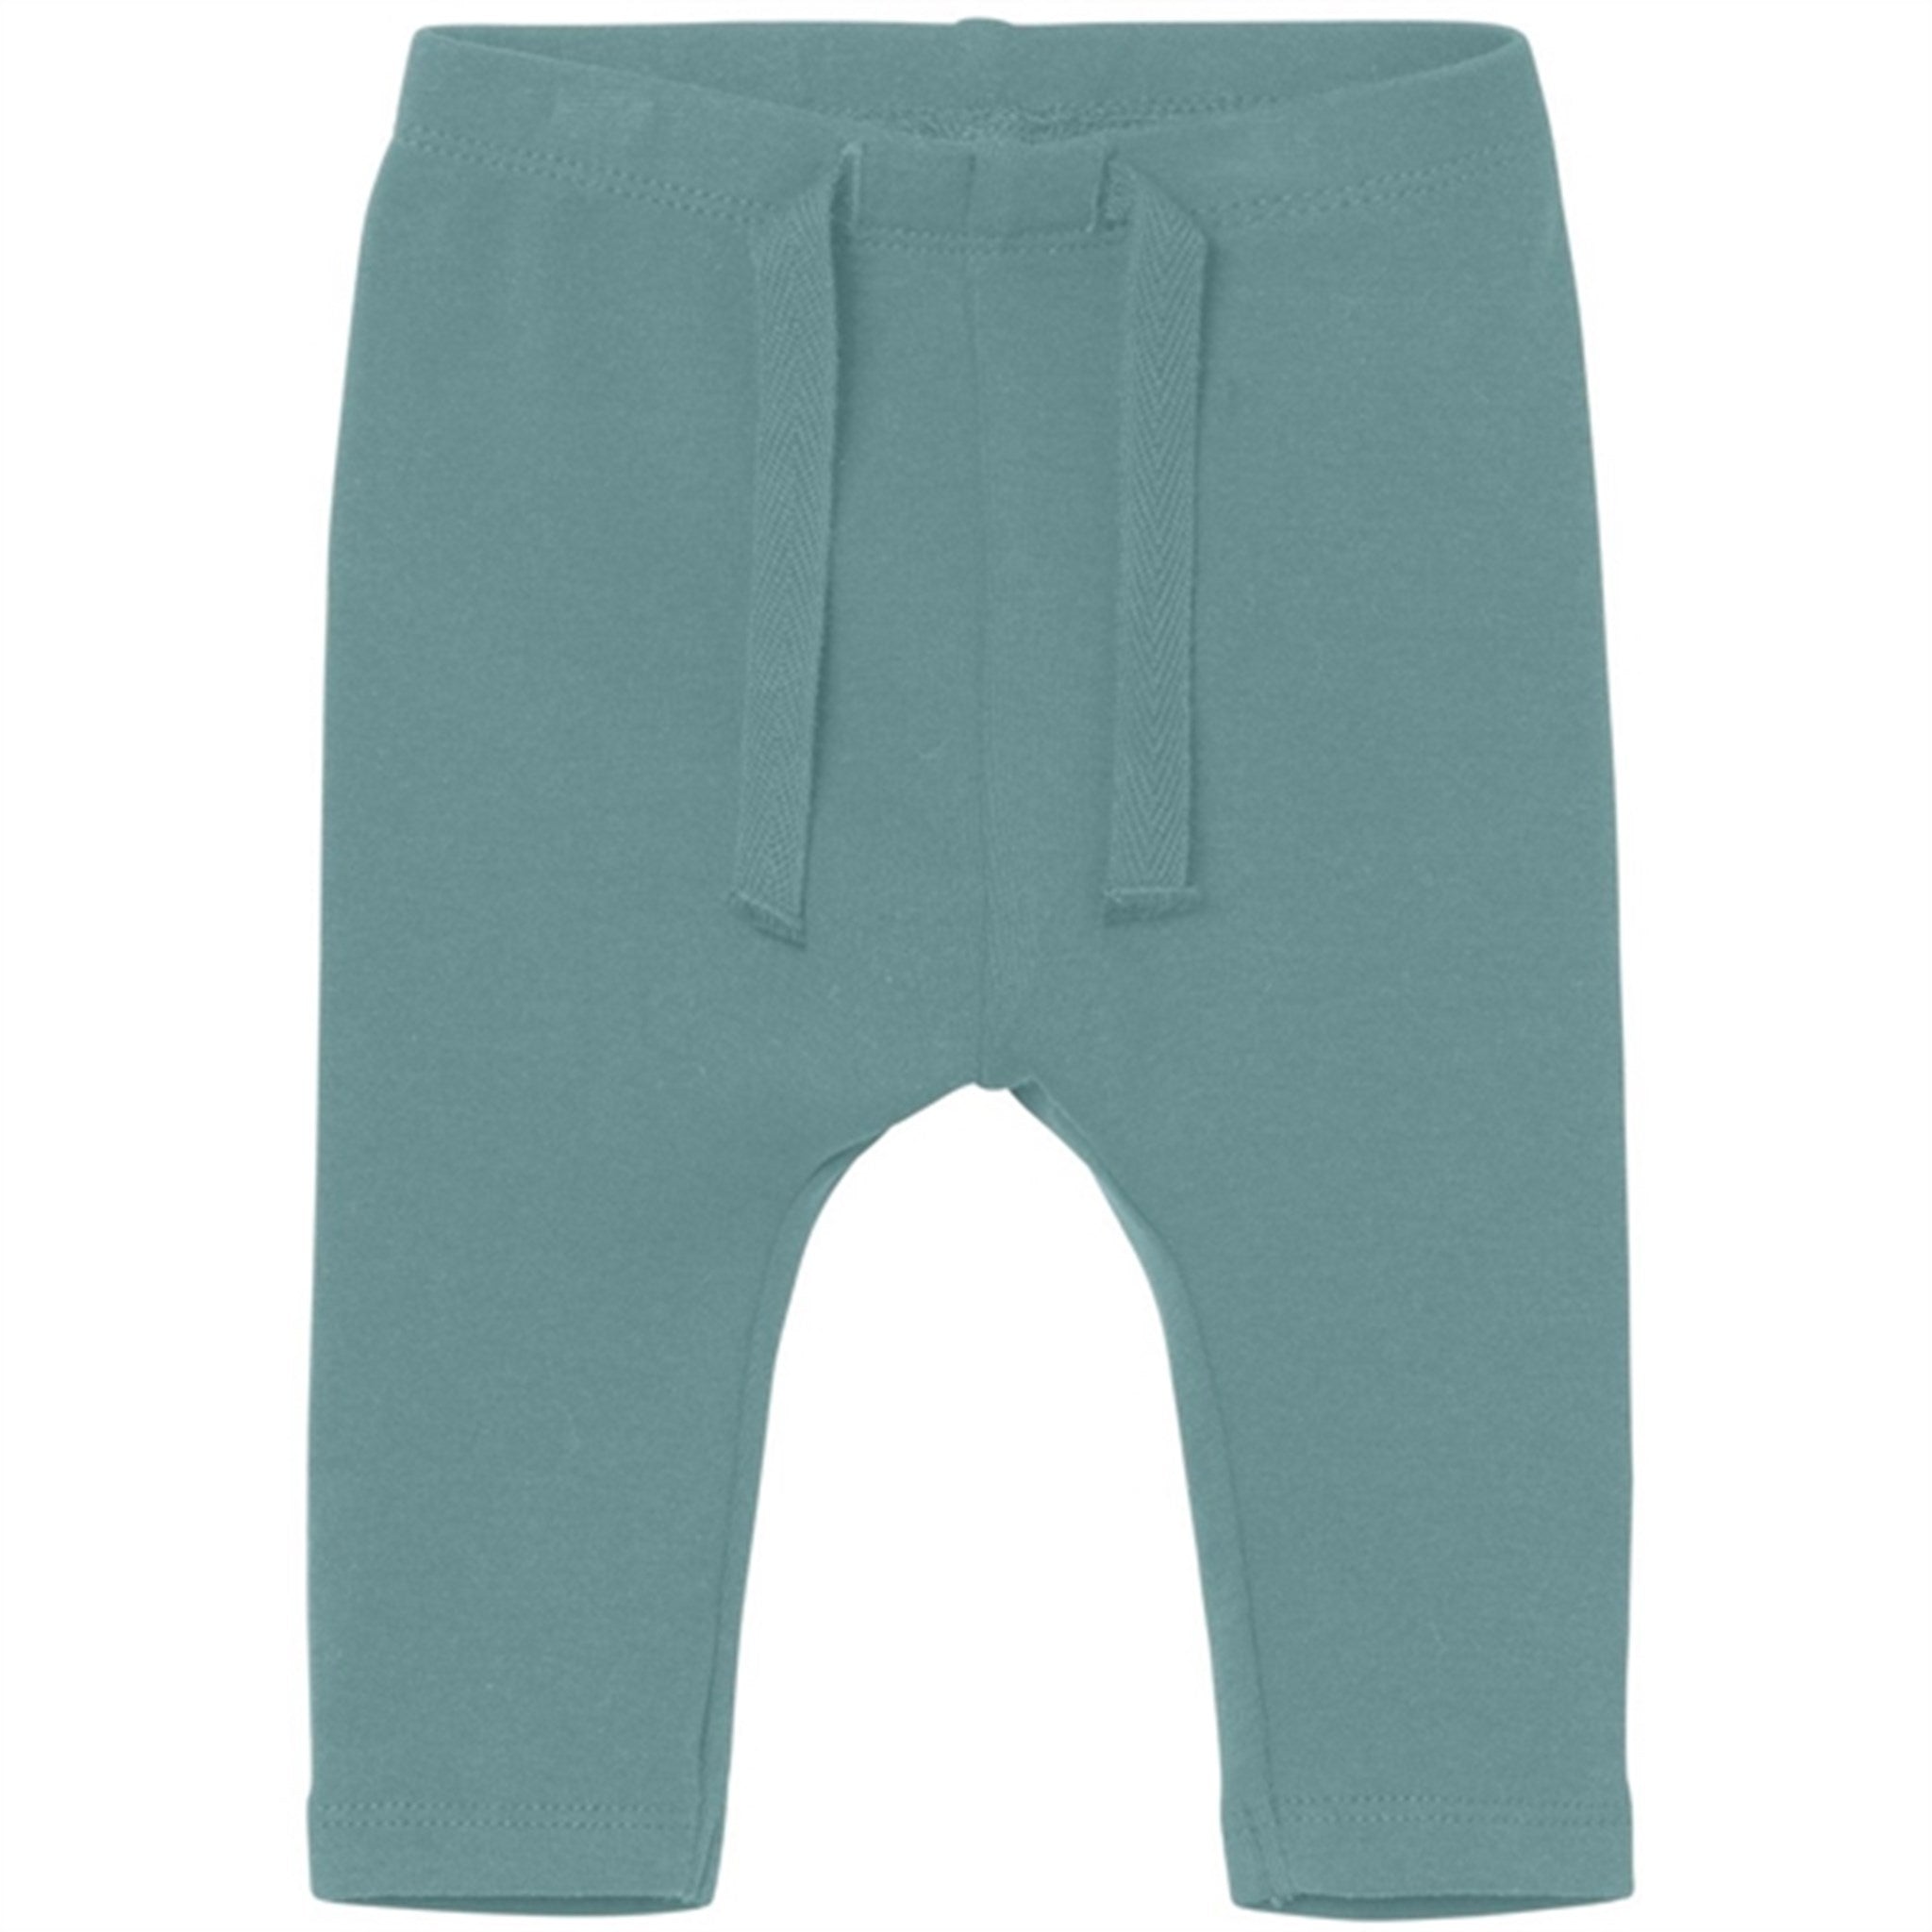 Name it Mineral Blue Danno Long Johns